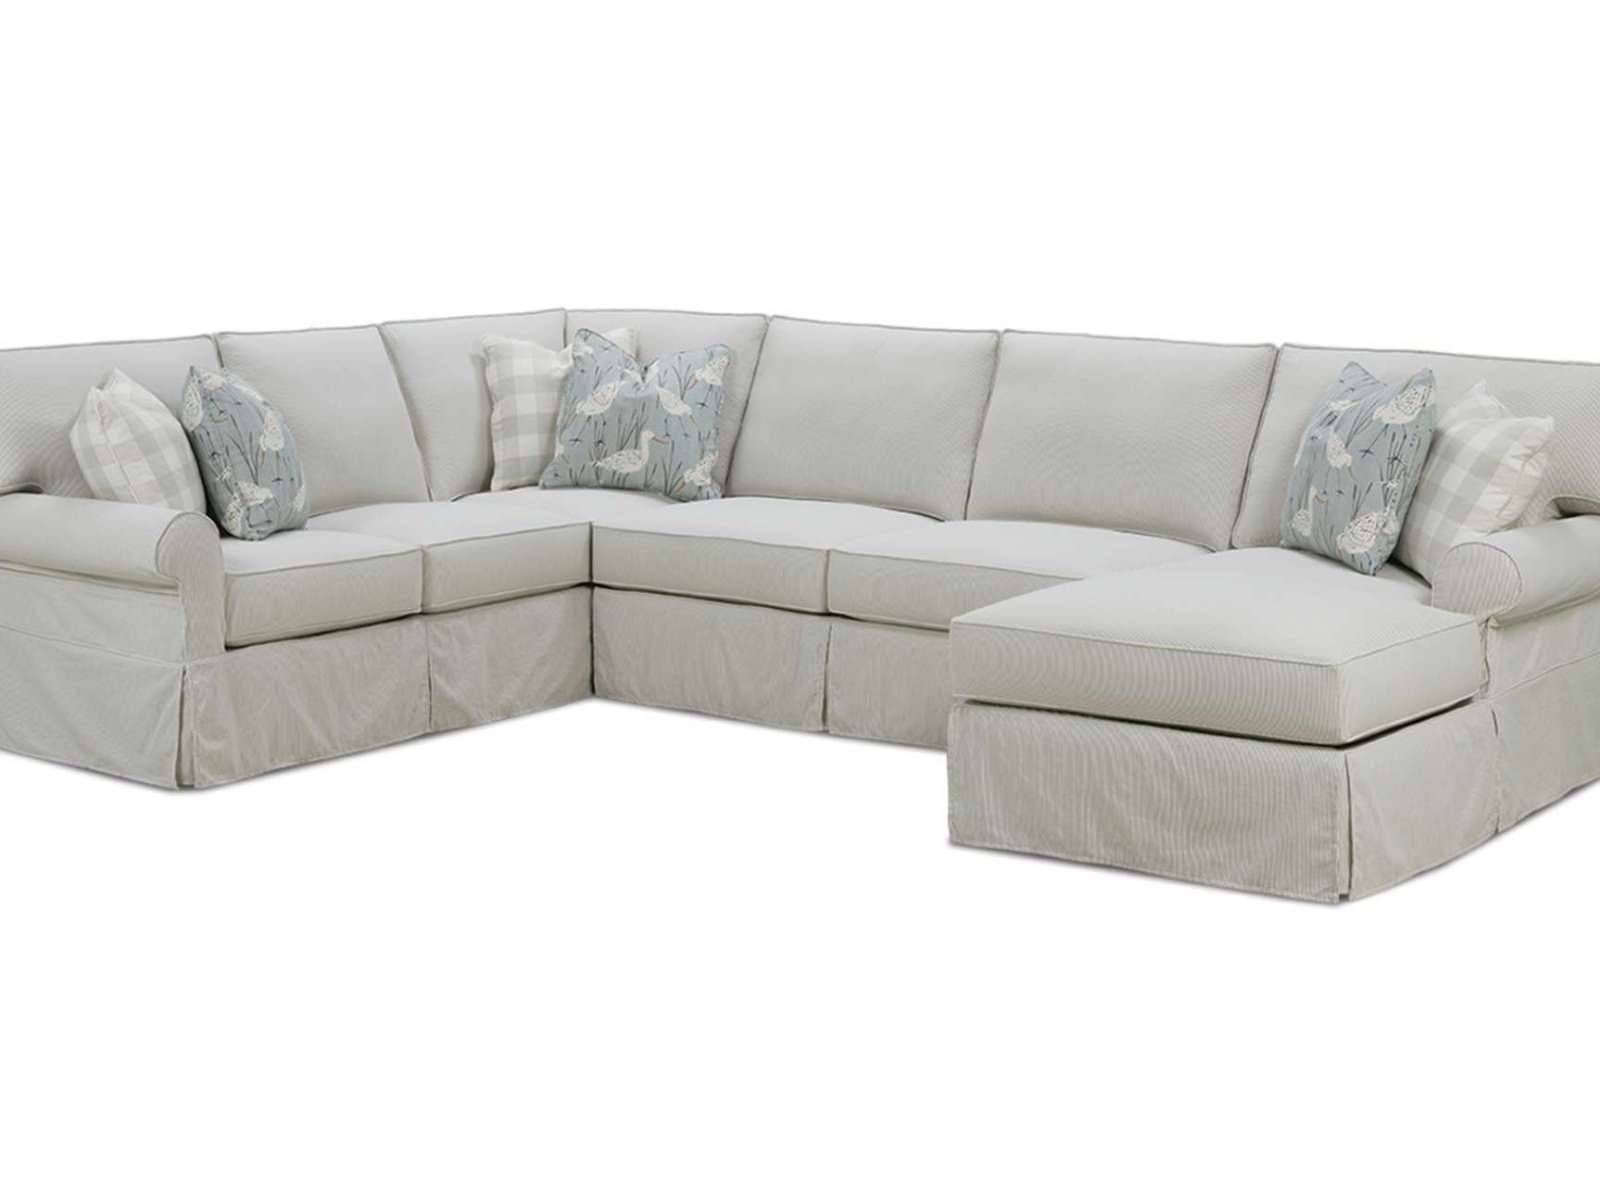 E296bb Sofa 39 Slipcovers For Sectionals Bed Bath And Beyond Inside 3 Piece Sectional Sofa Slipcovers 